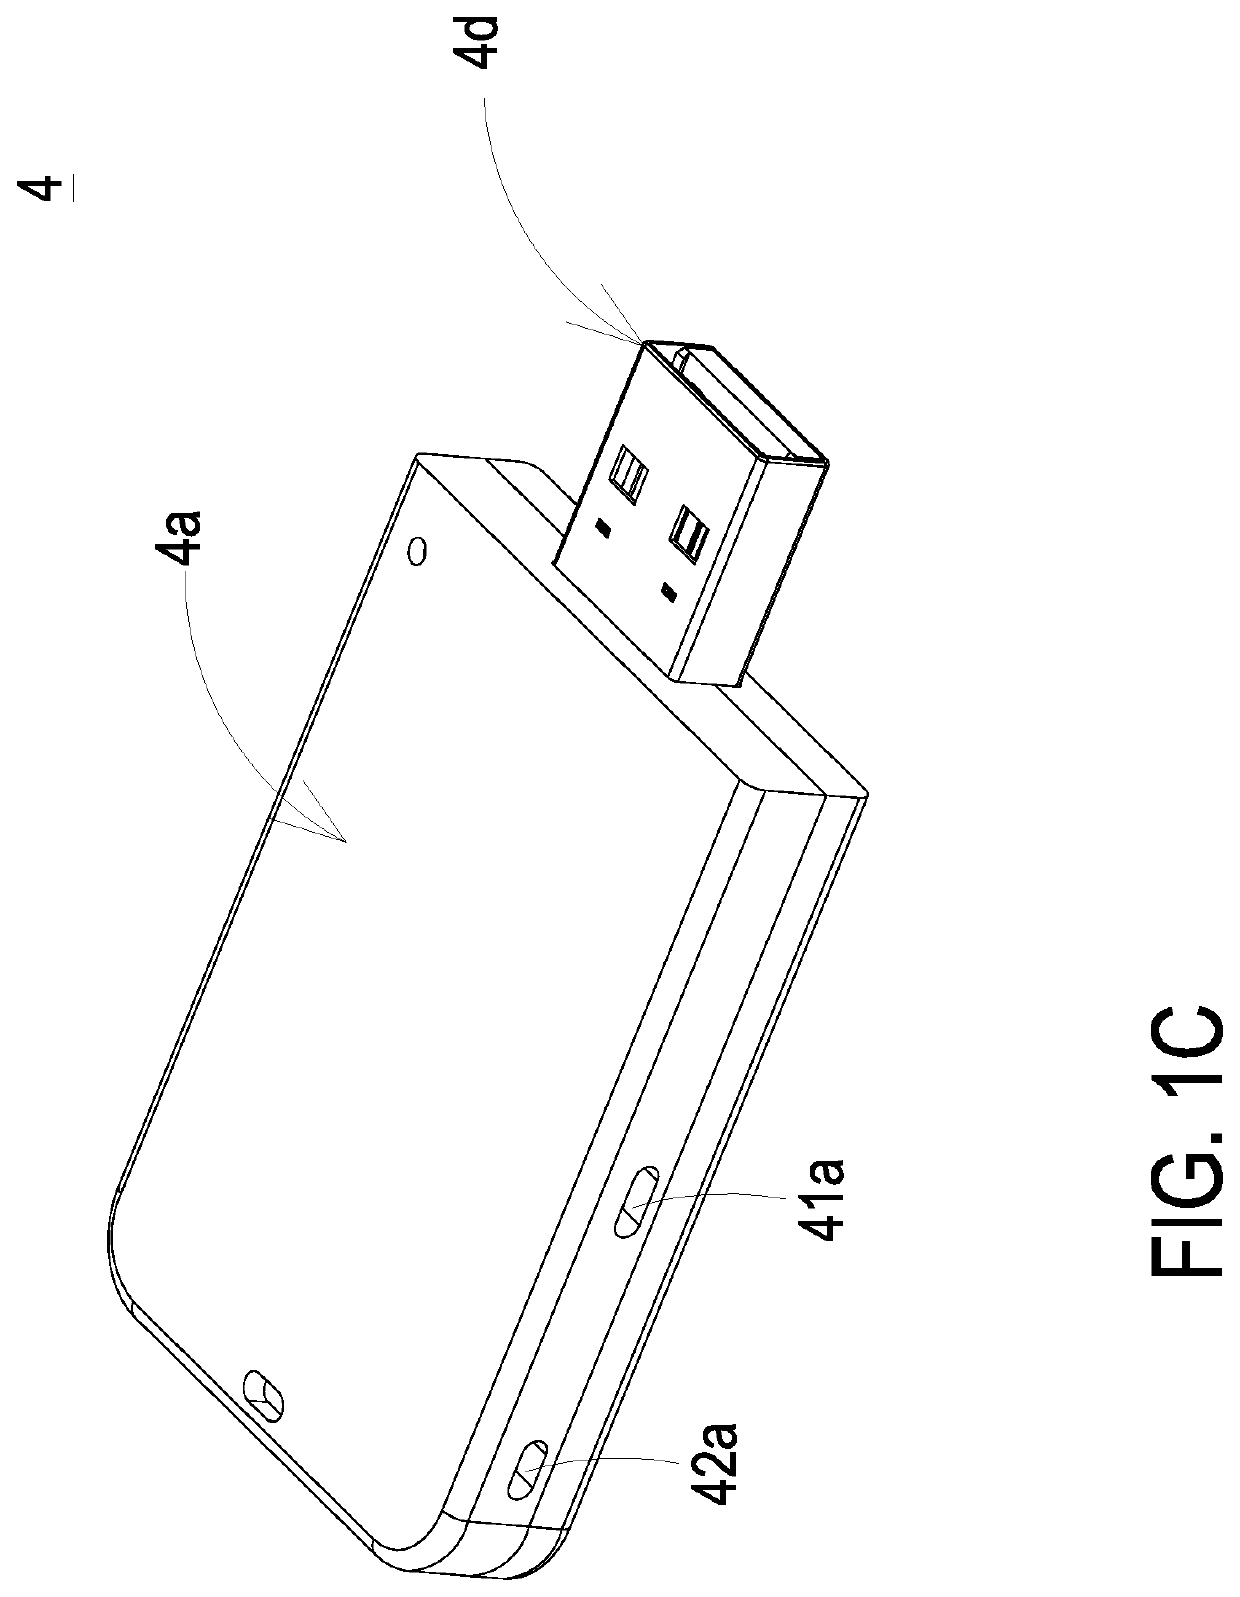 Gas detection purification device